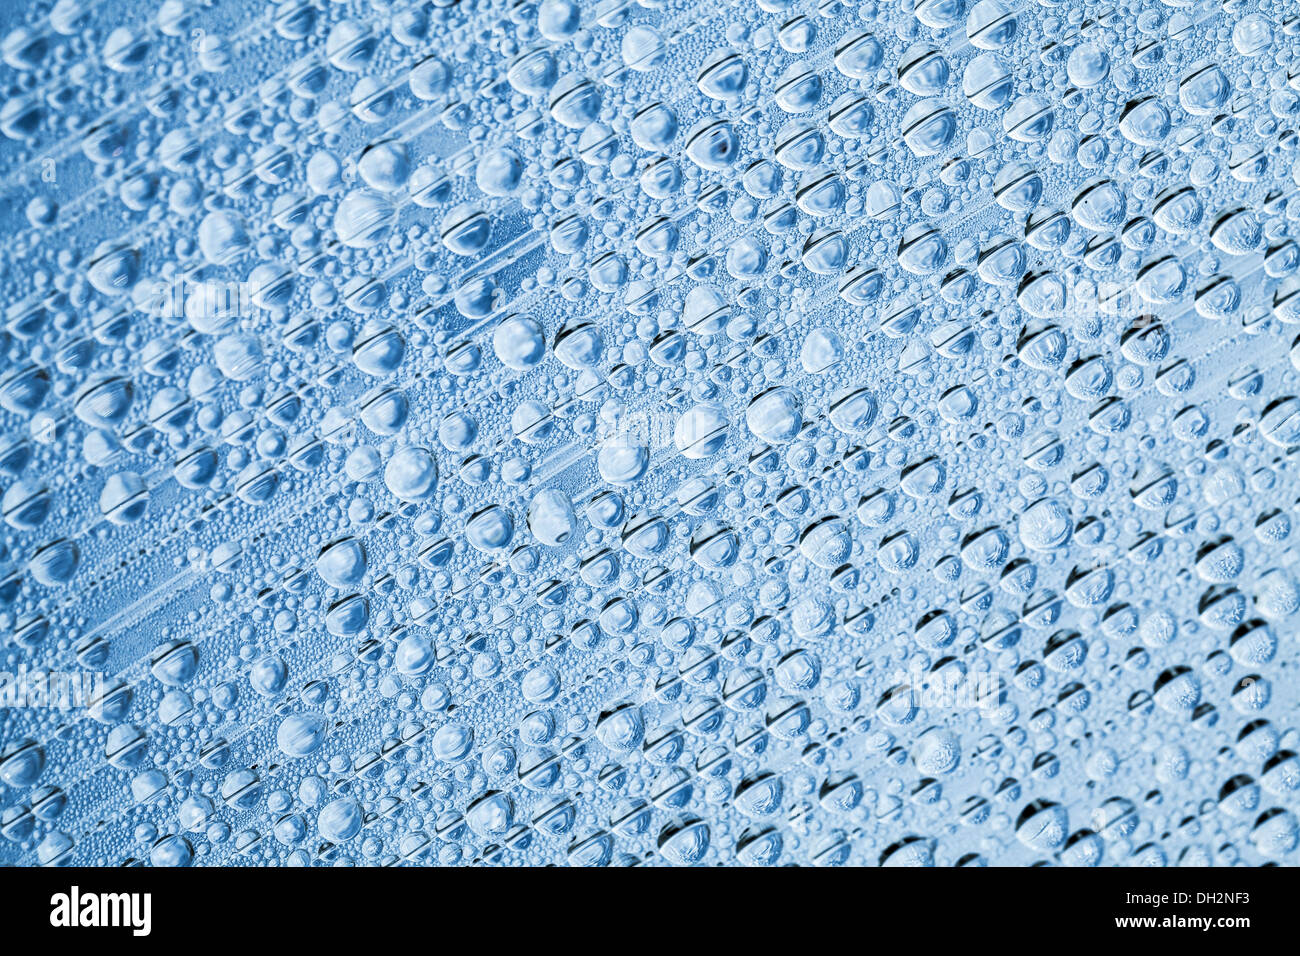 Water drops on transparent plastic surface. Photo background texture Stock Photo